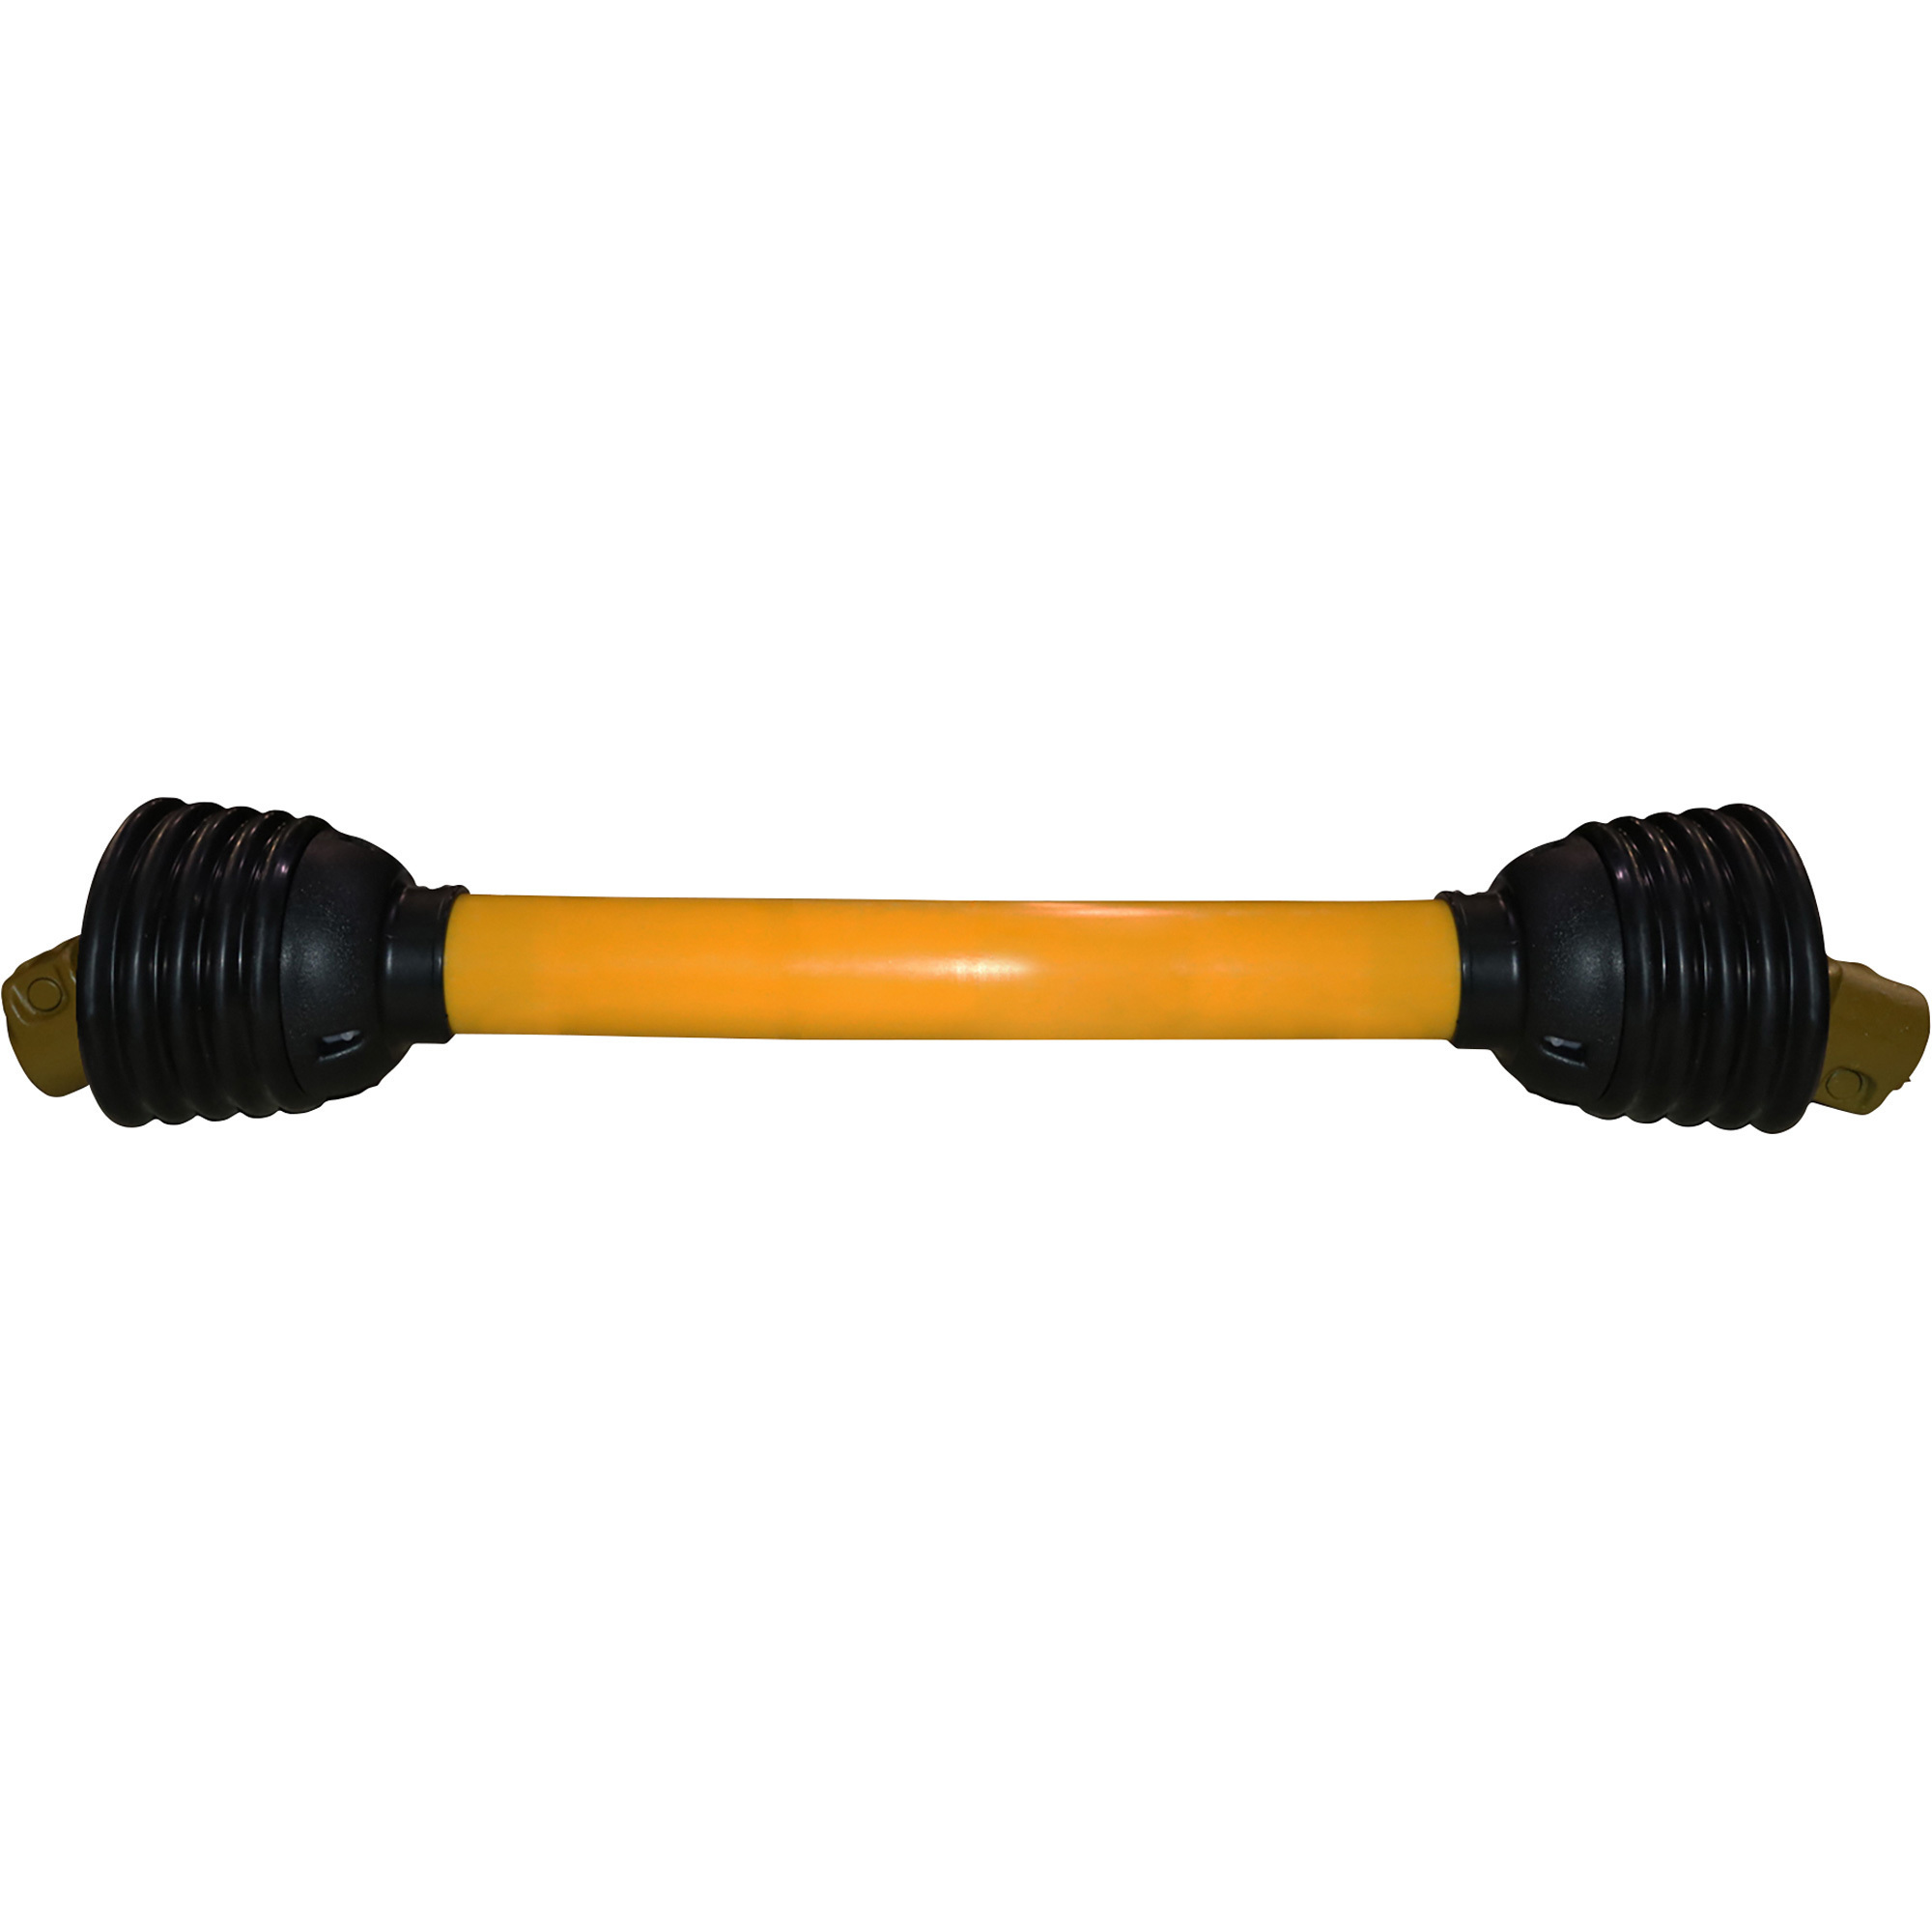 Braber Equipment General-Purpose PTO Shaft Assembly, 32Inch Collapsed Length, Model 69.885.001